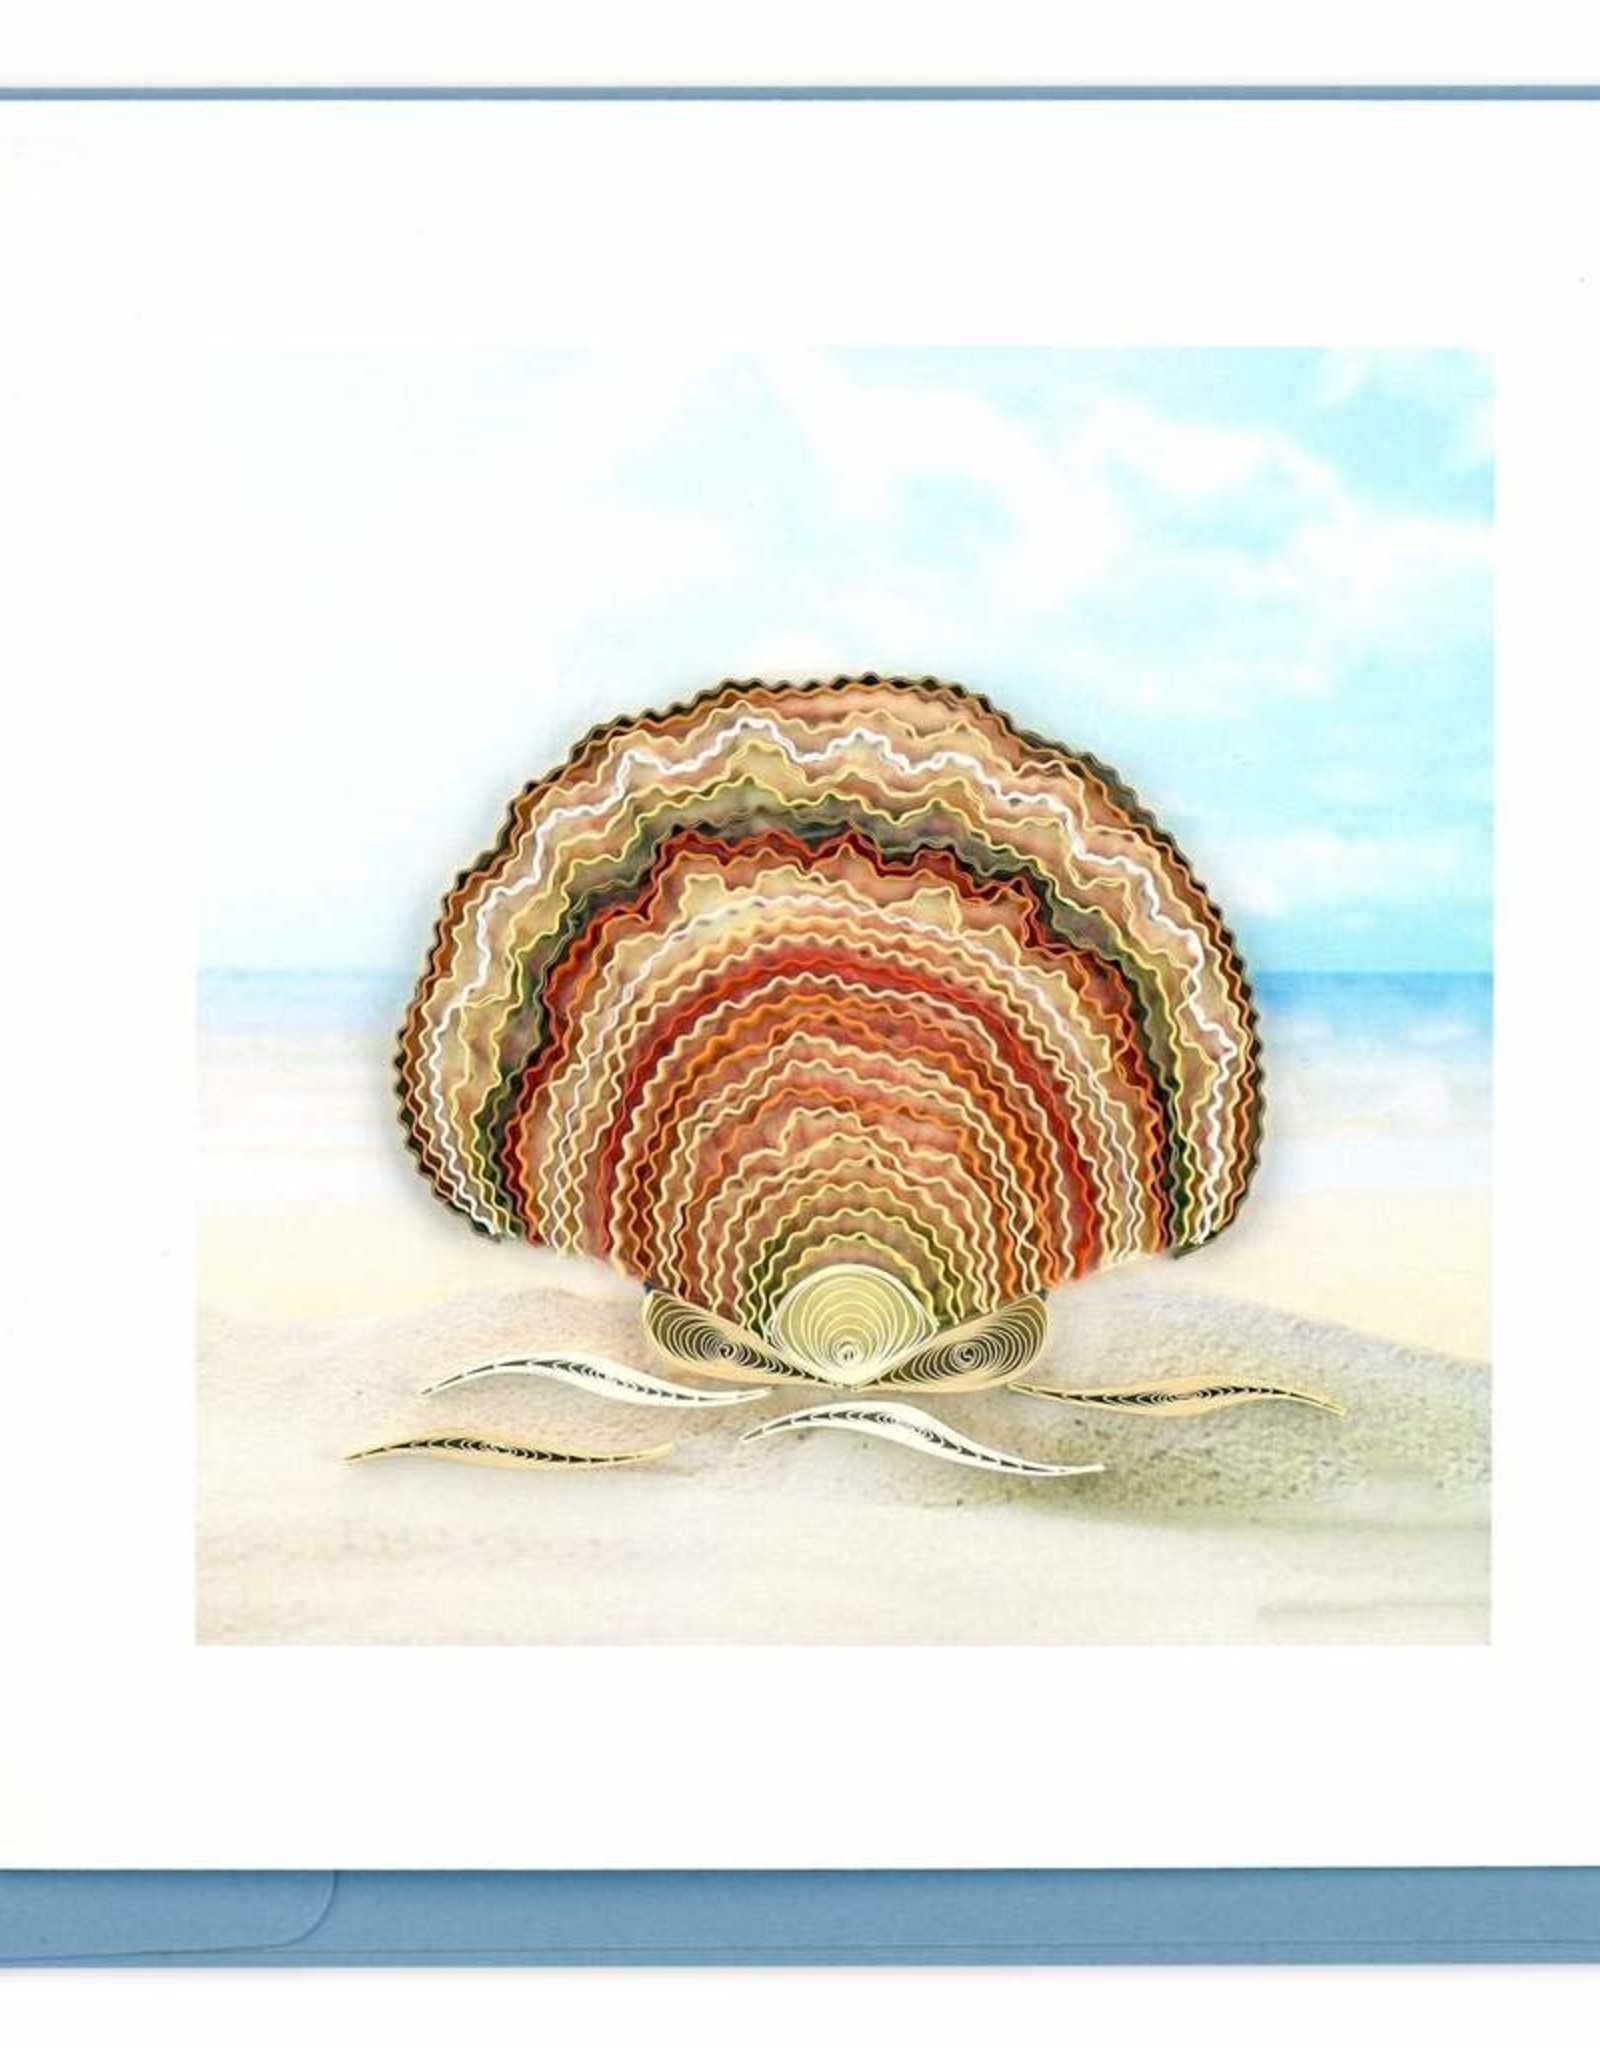 Quilling Card Quilled Scallop Shell Greeting Card